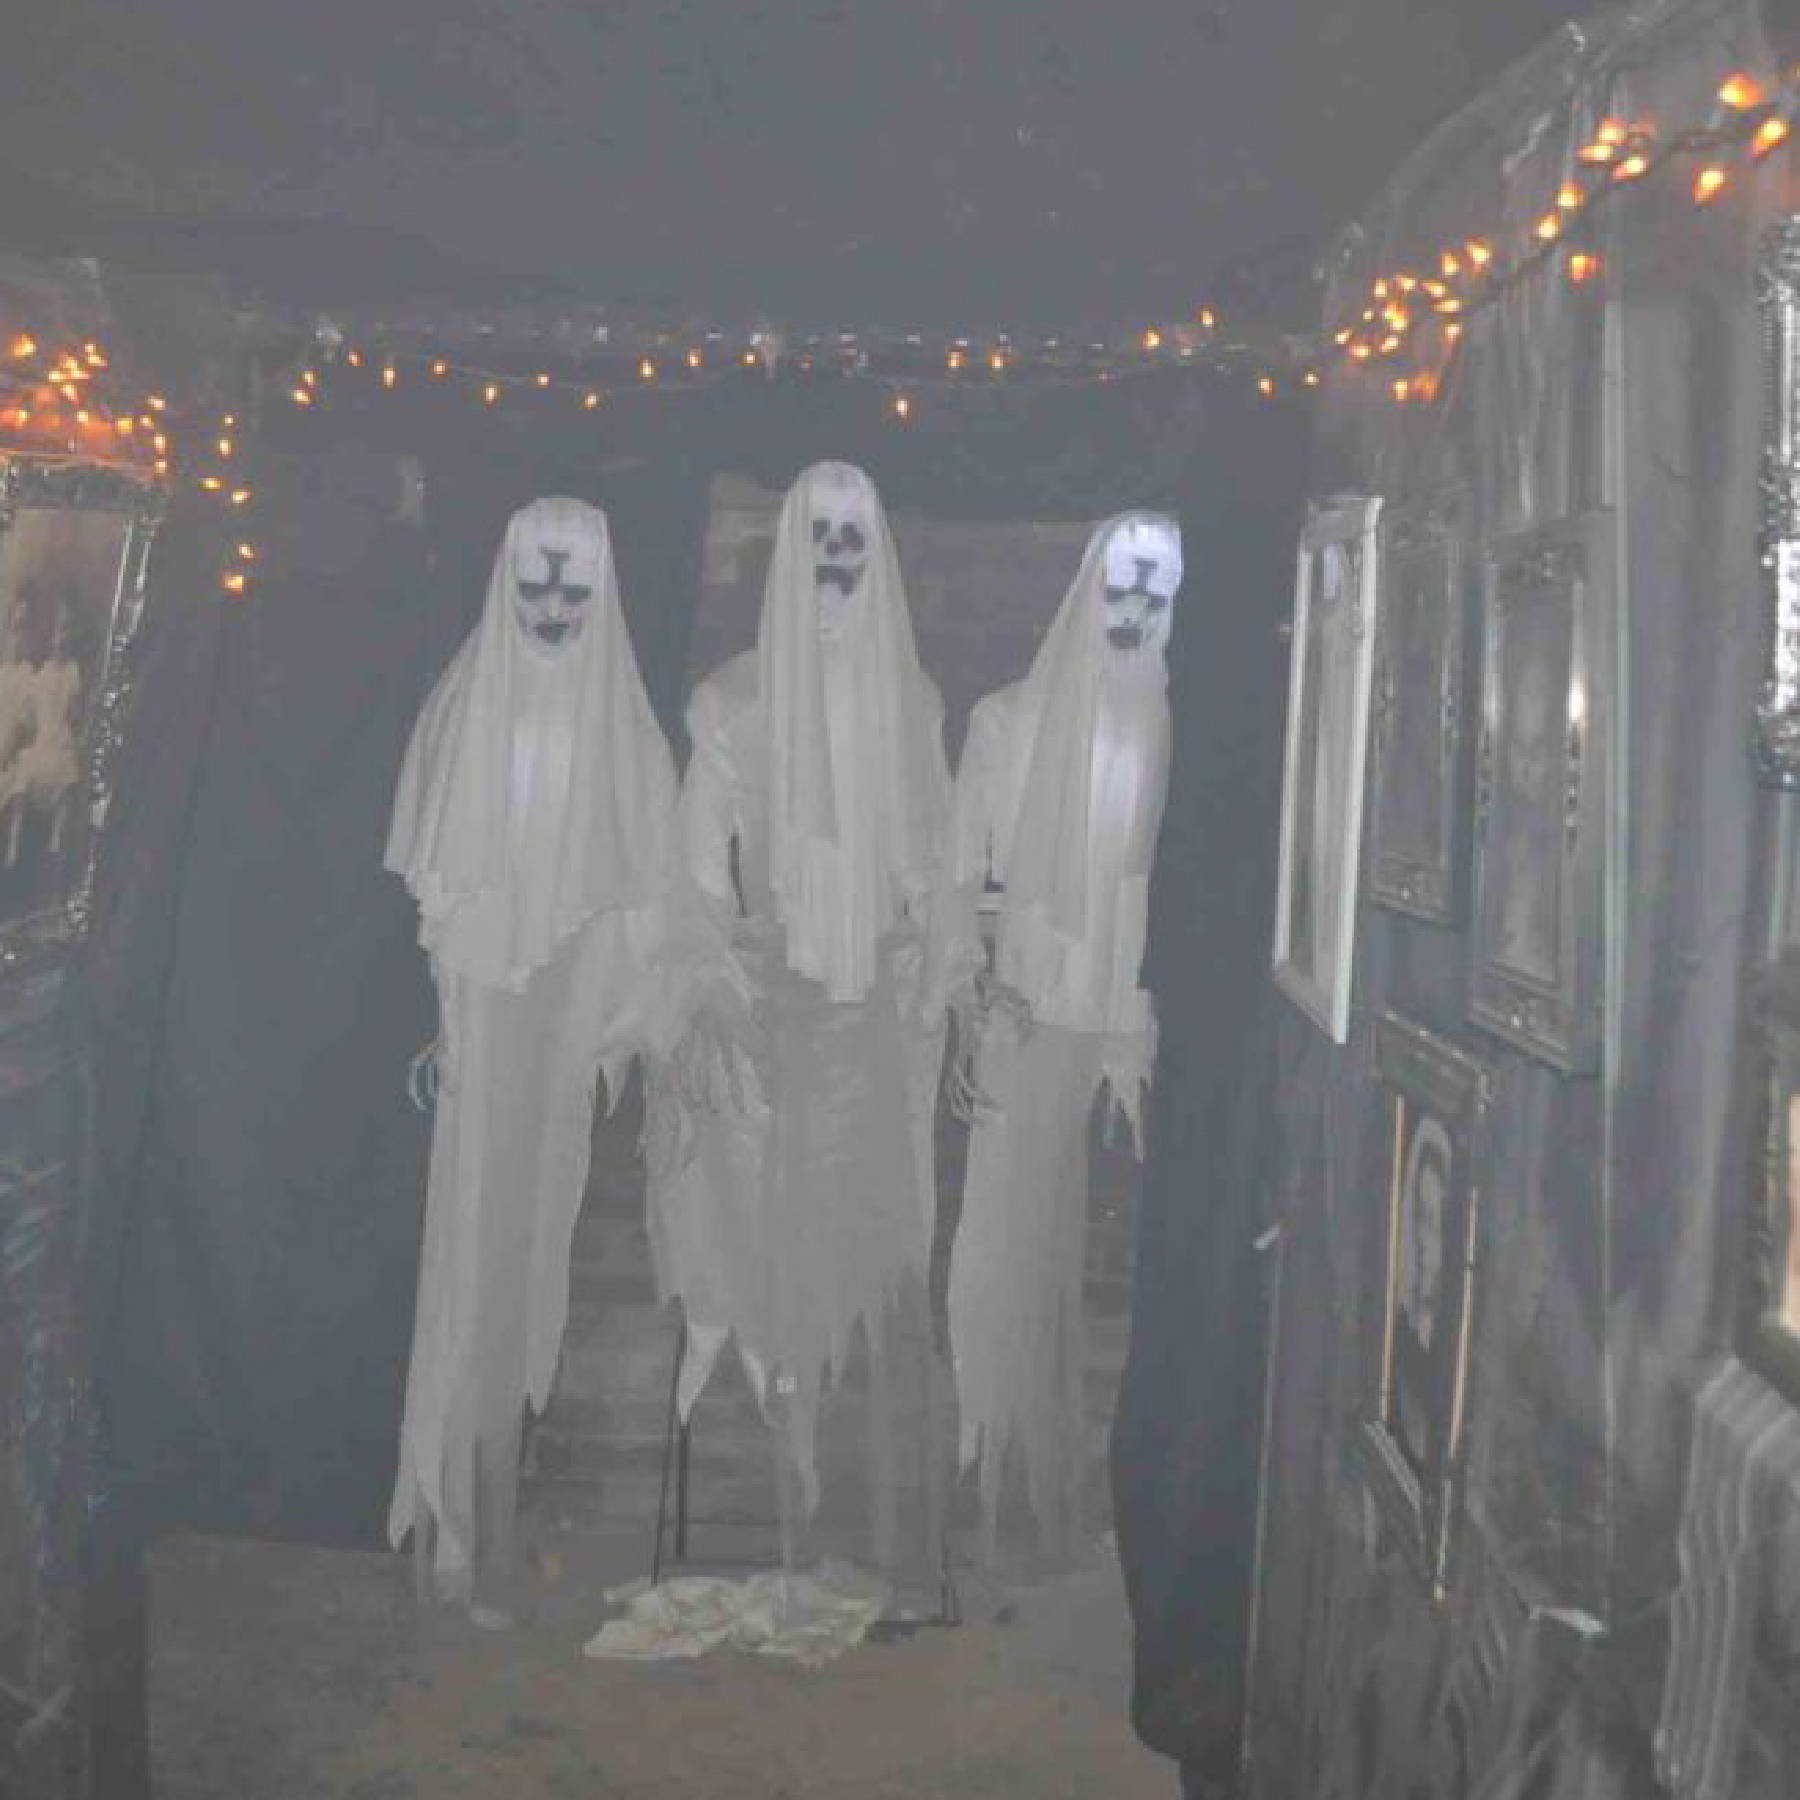 a group of people dressed in white ghost clothing